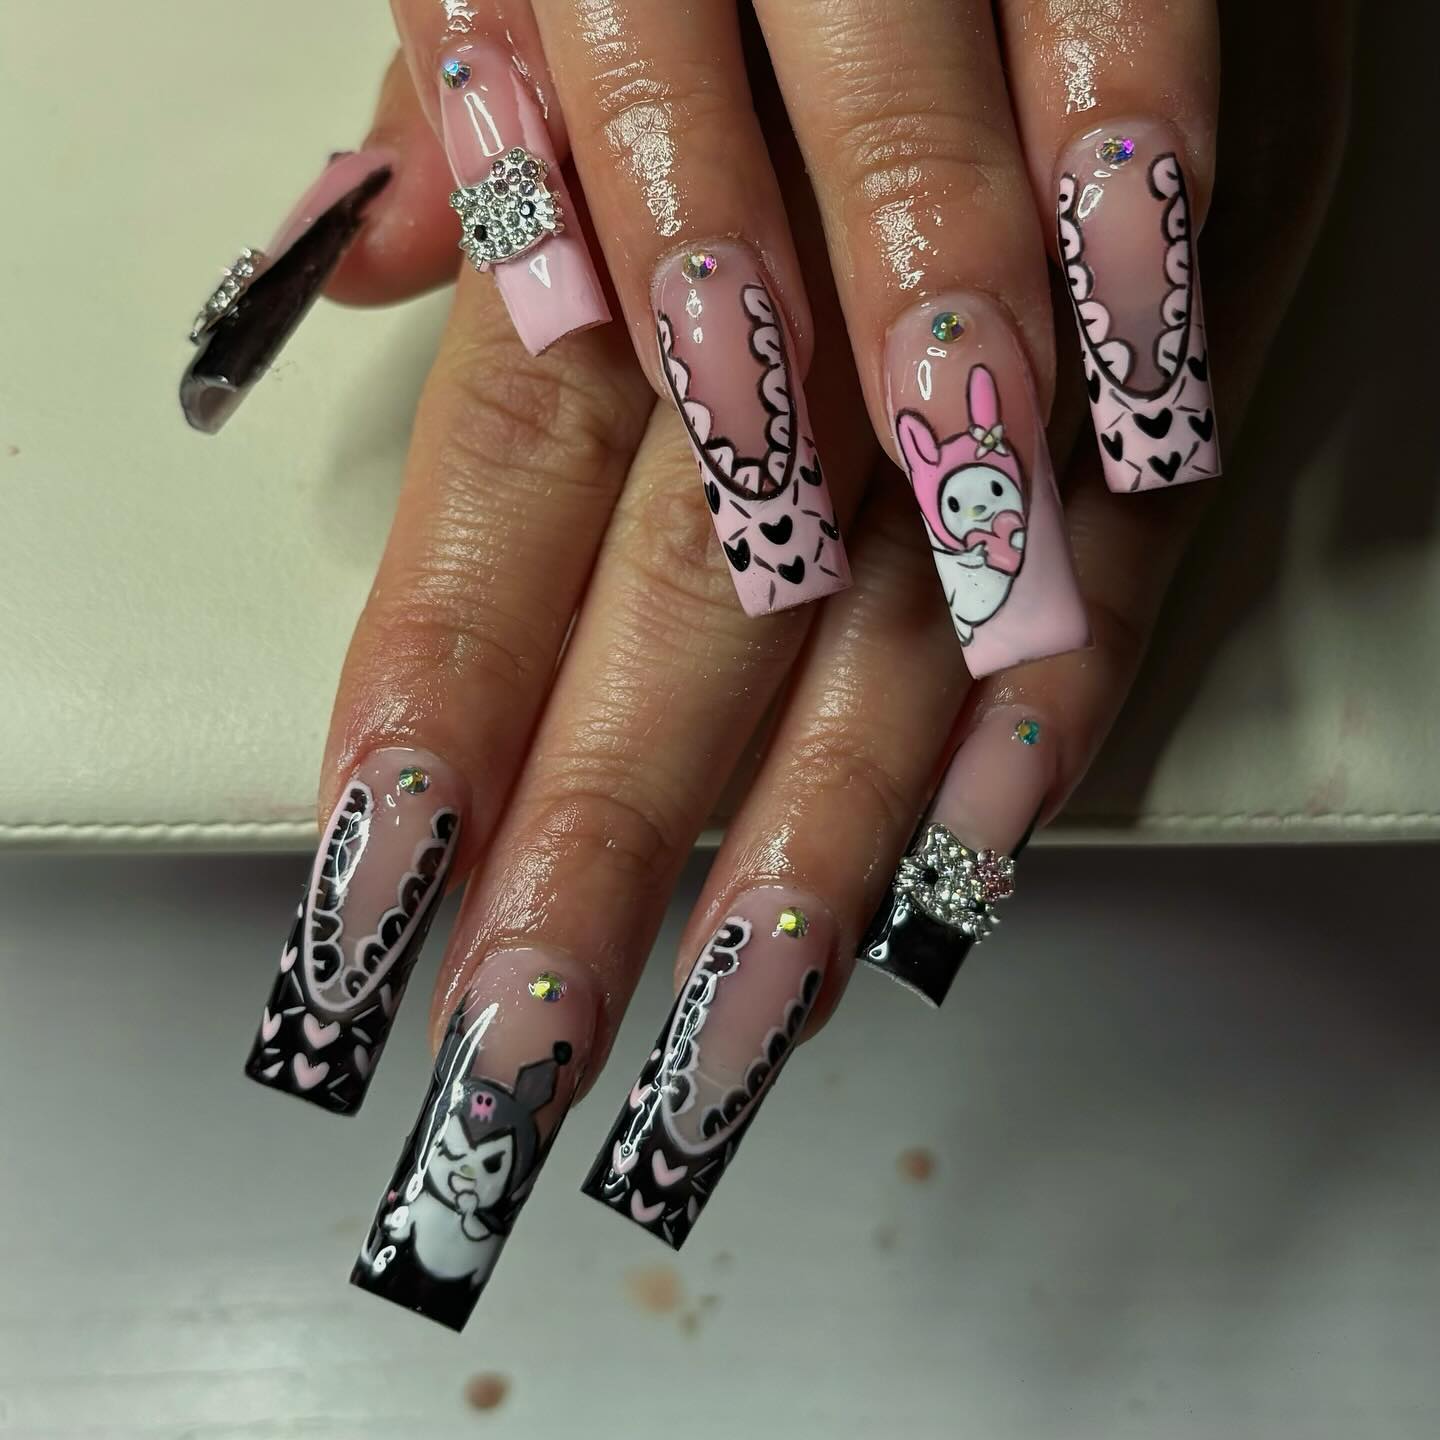 Nude Nail With Hand Drawn Art